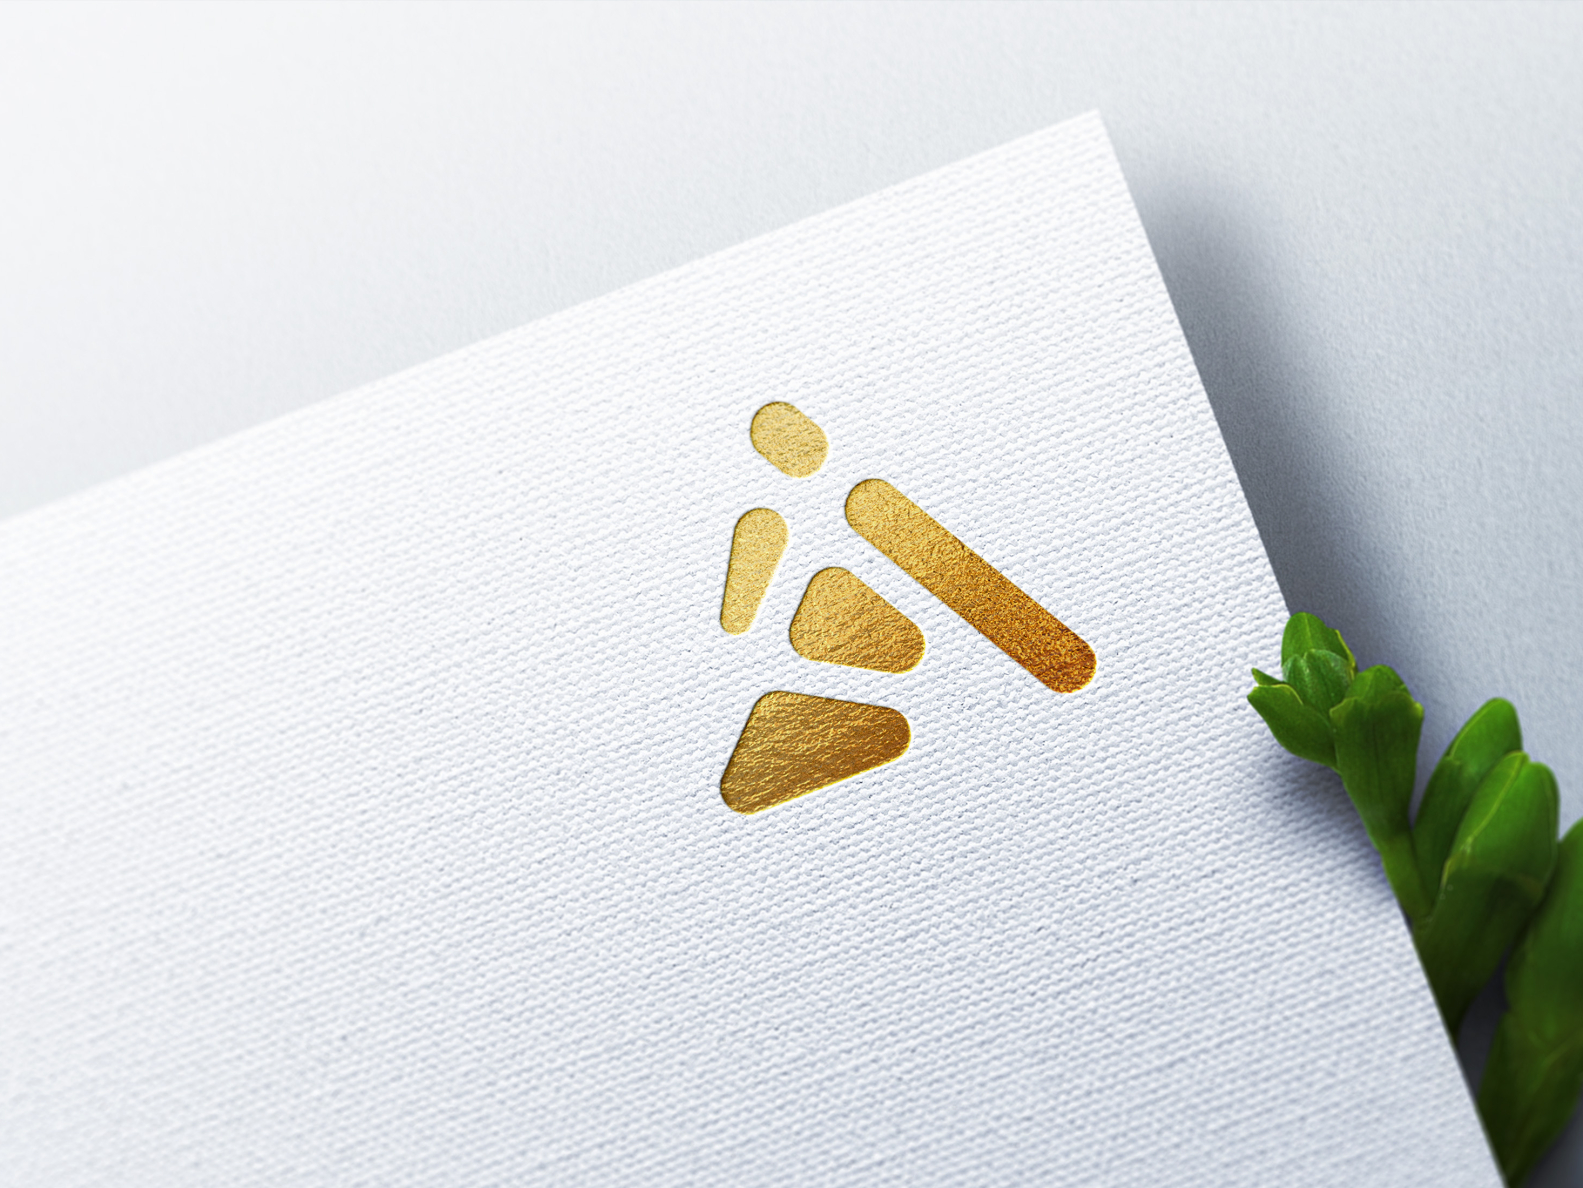 Download Luxury Logo Mockup On White Craft Paper Premium Psd By Mithun Mitra On Dribbble